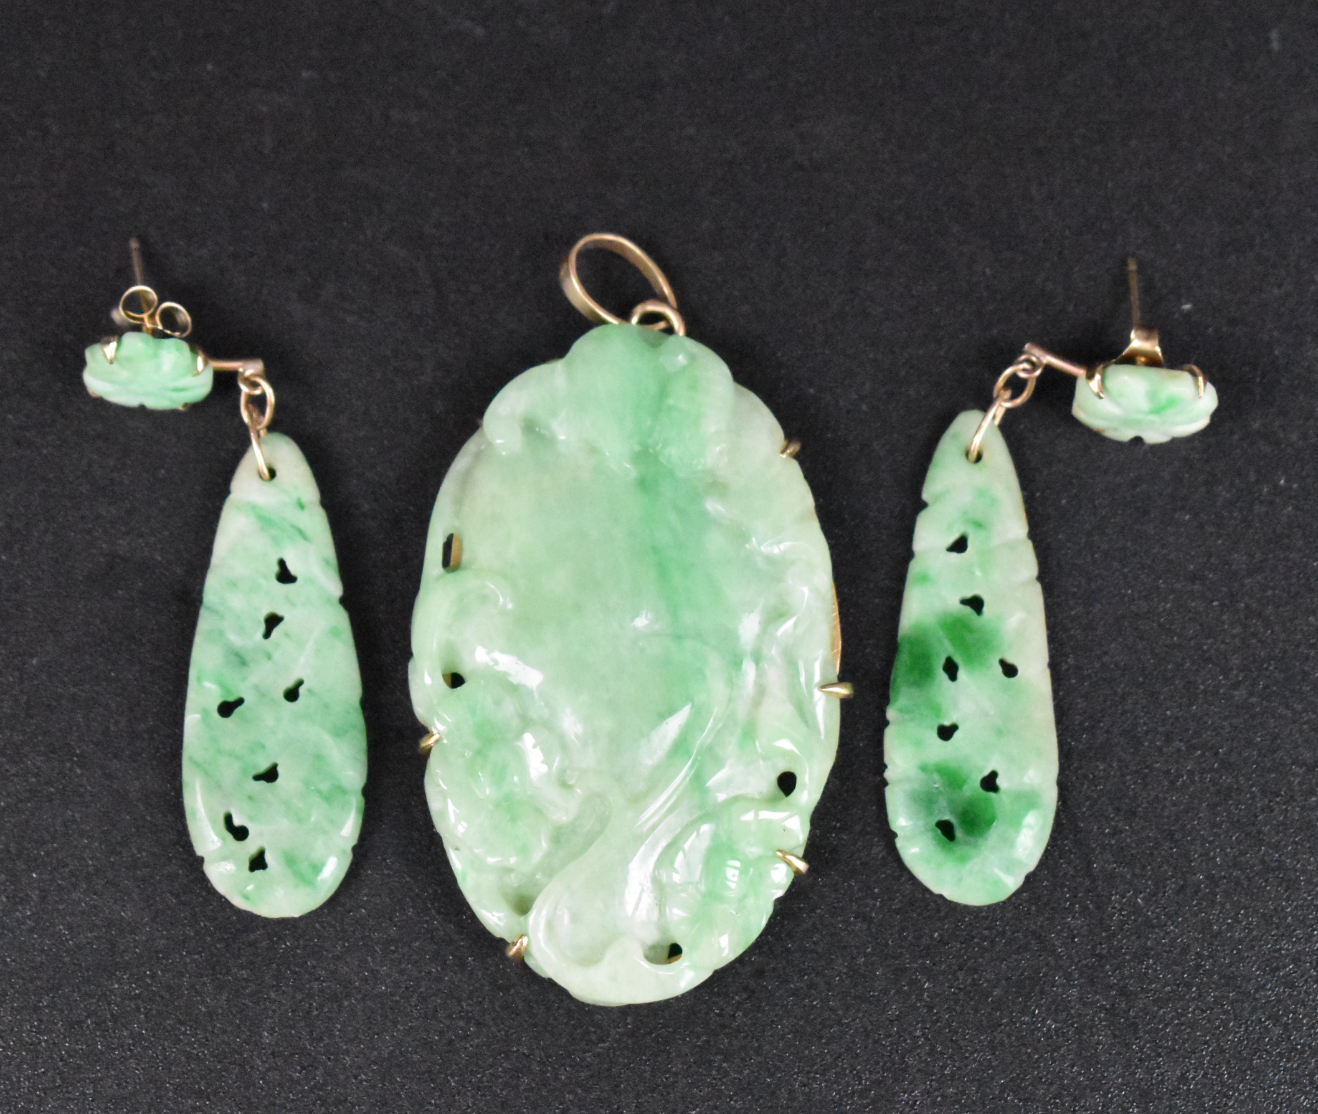 PAIR OF CHINESE JADEITE EARRINGS 33a37e